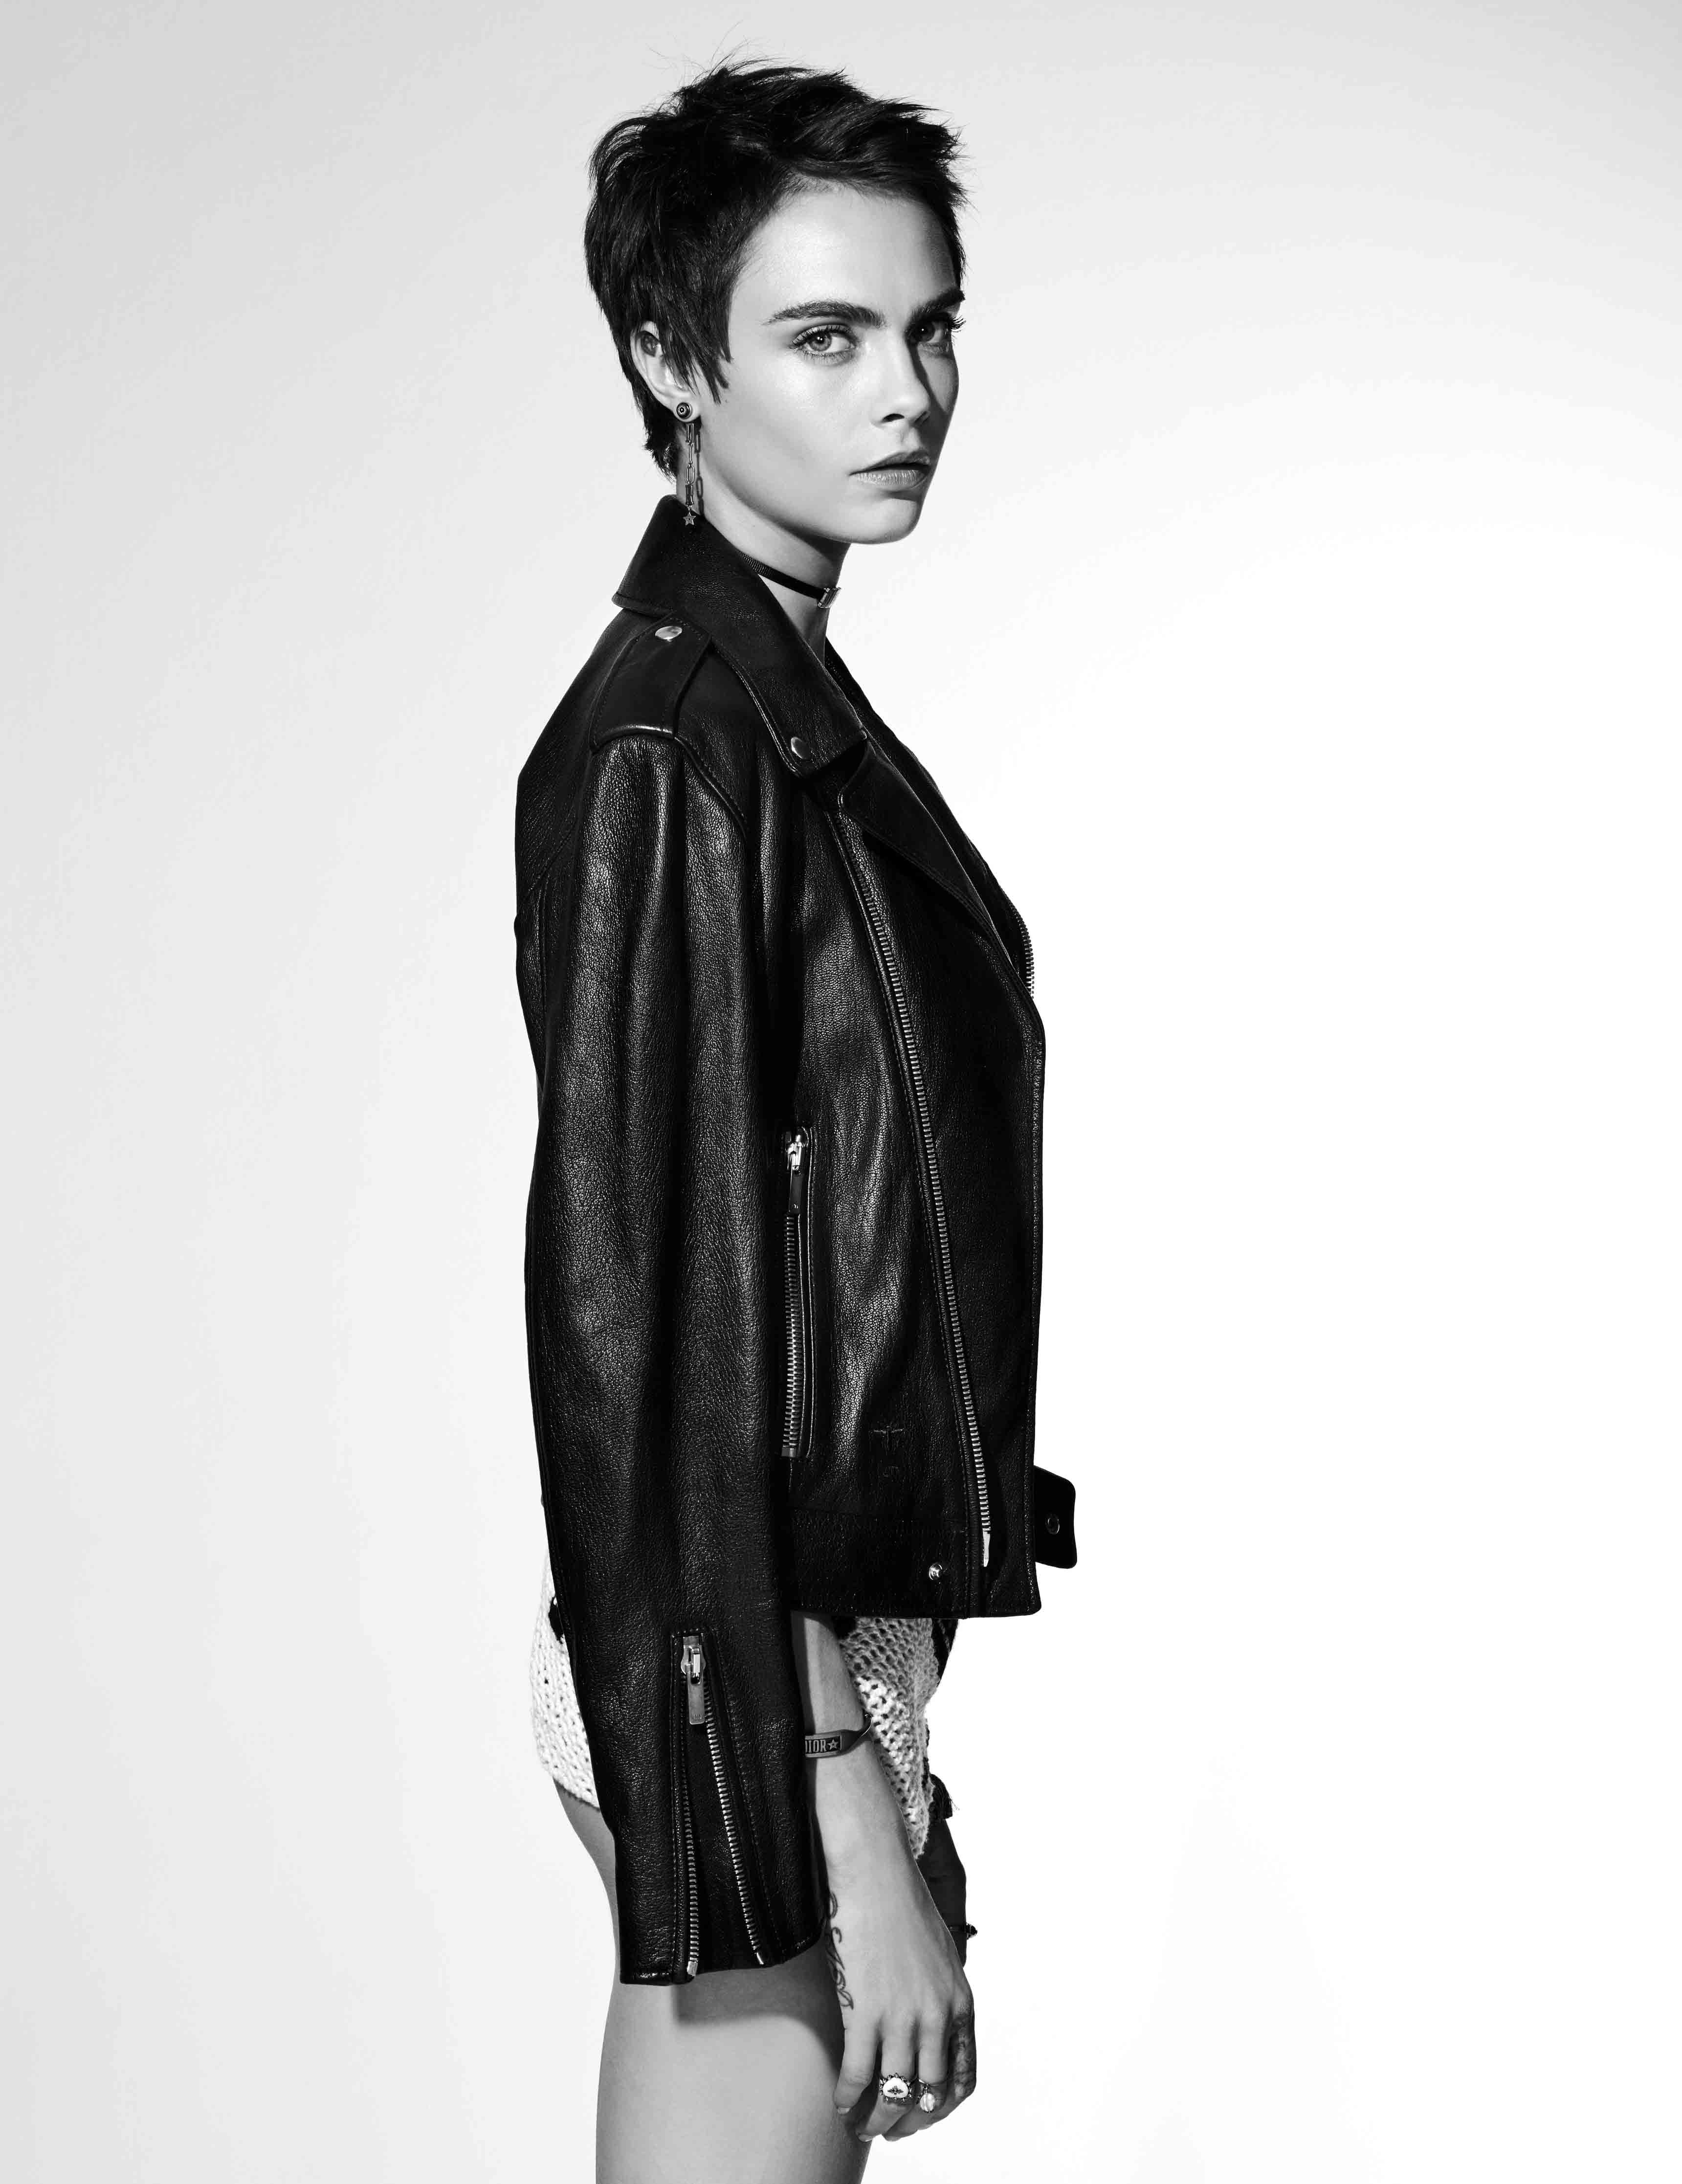 Top model, actress, singer and novelist... Interview with Cara Delevingne